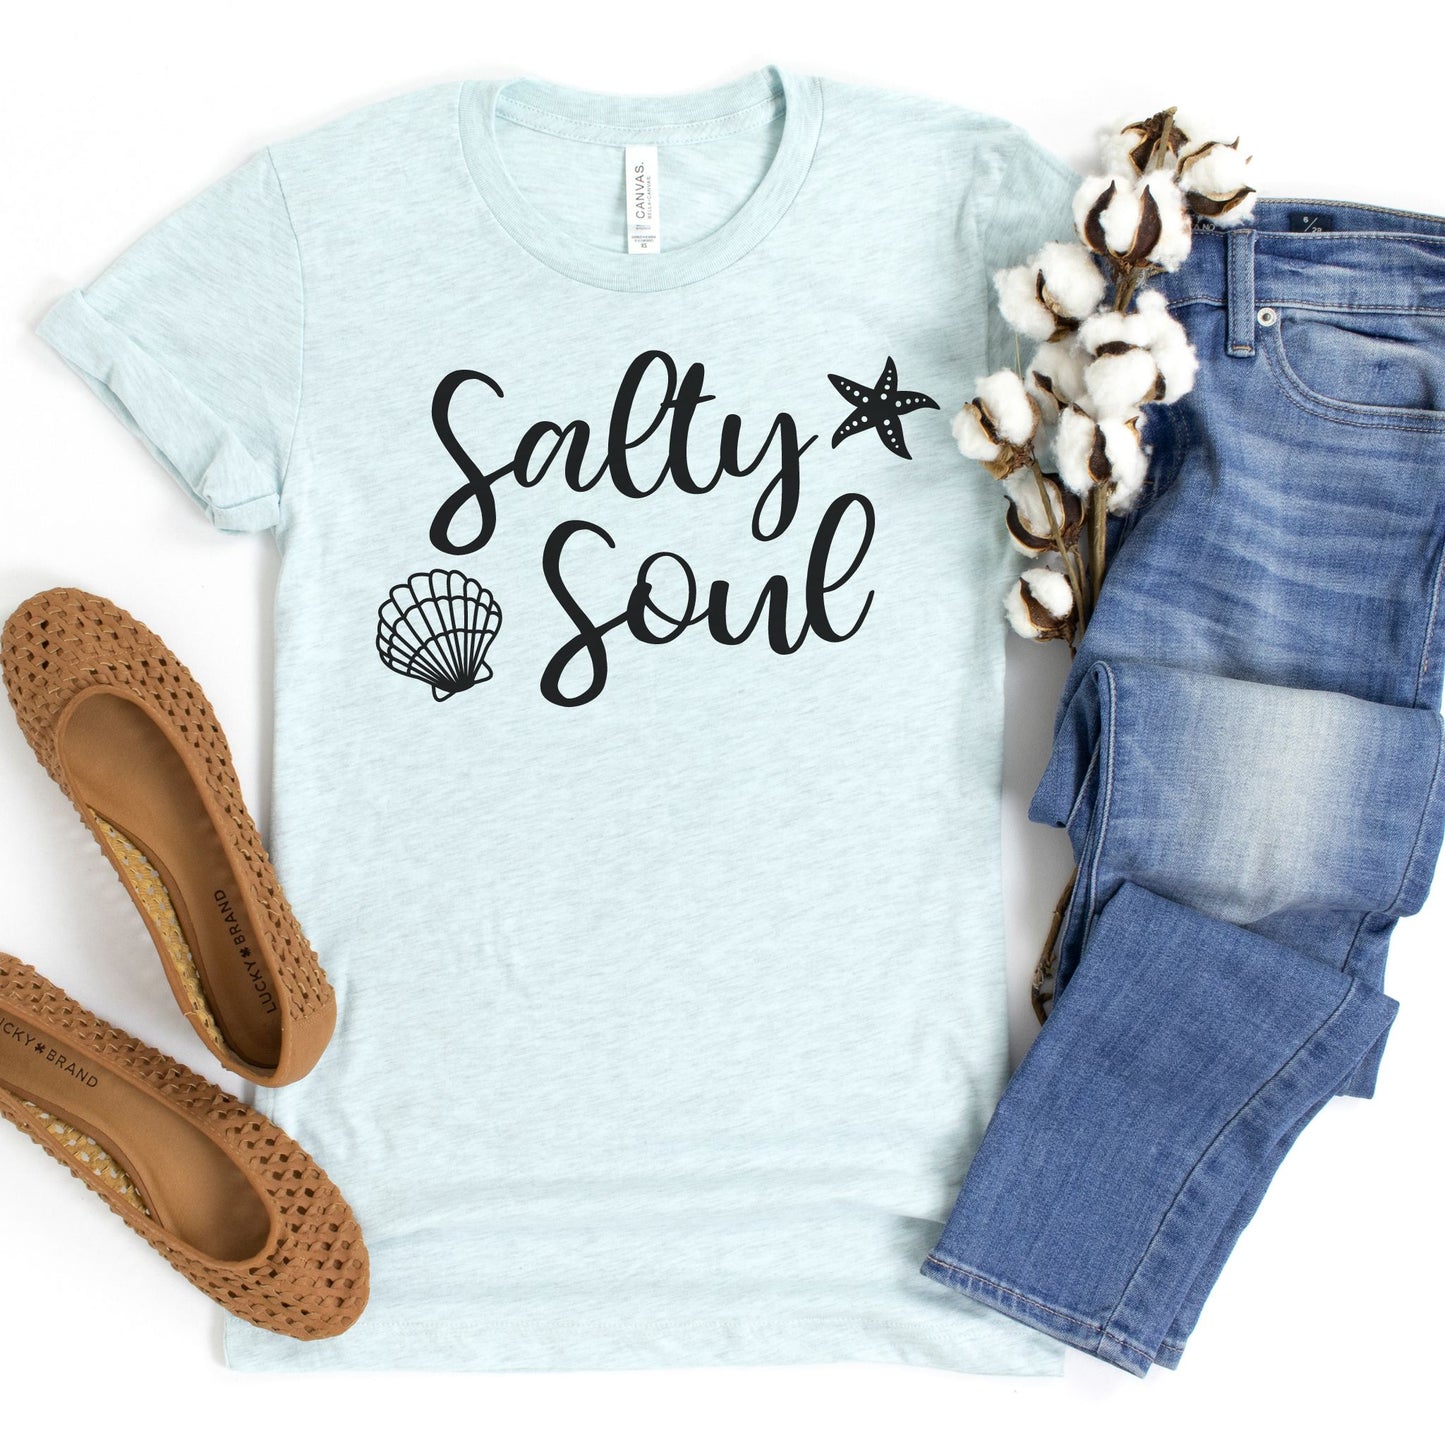 Salty Soul Graphic Tee in Heather Prism Ice Blue